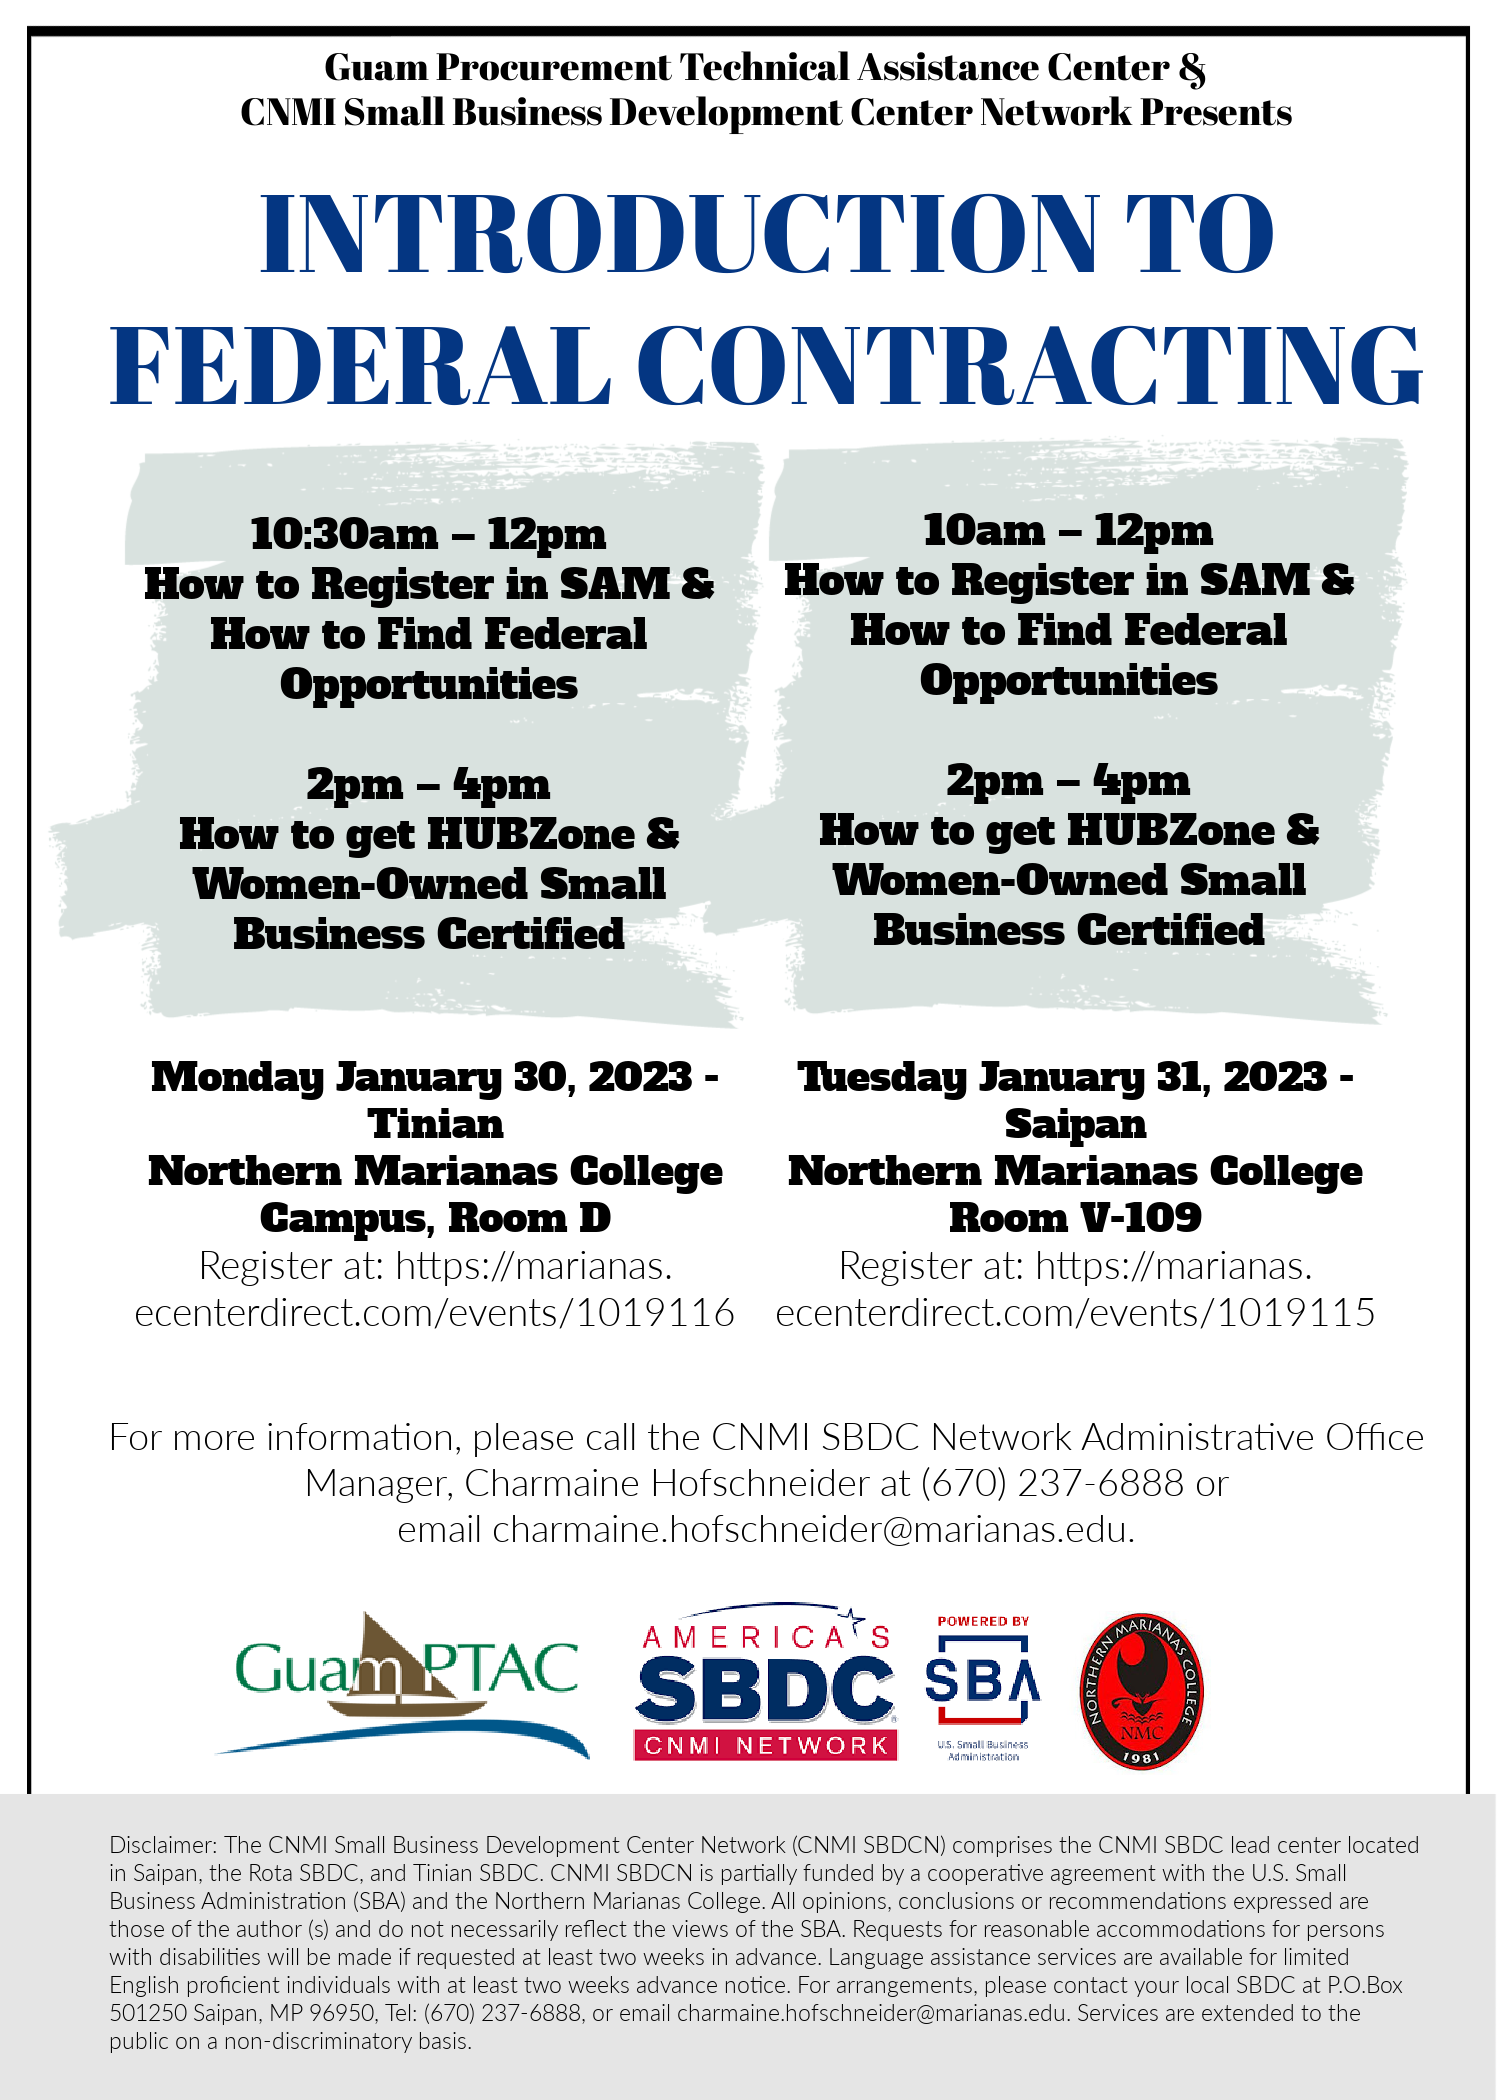 INTRO TO FEDERAL CONTRACTING Flyer